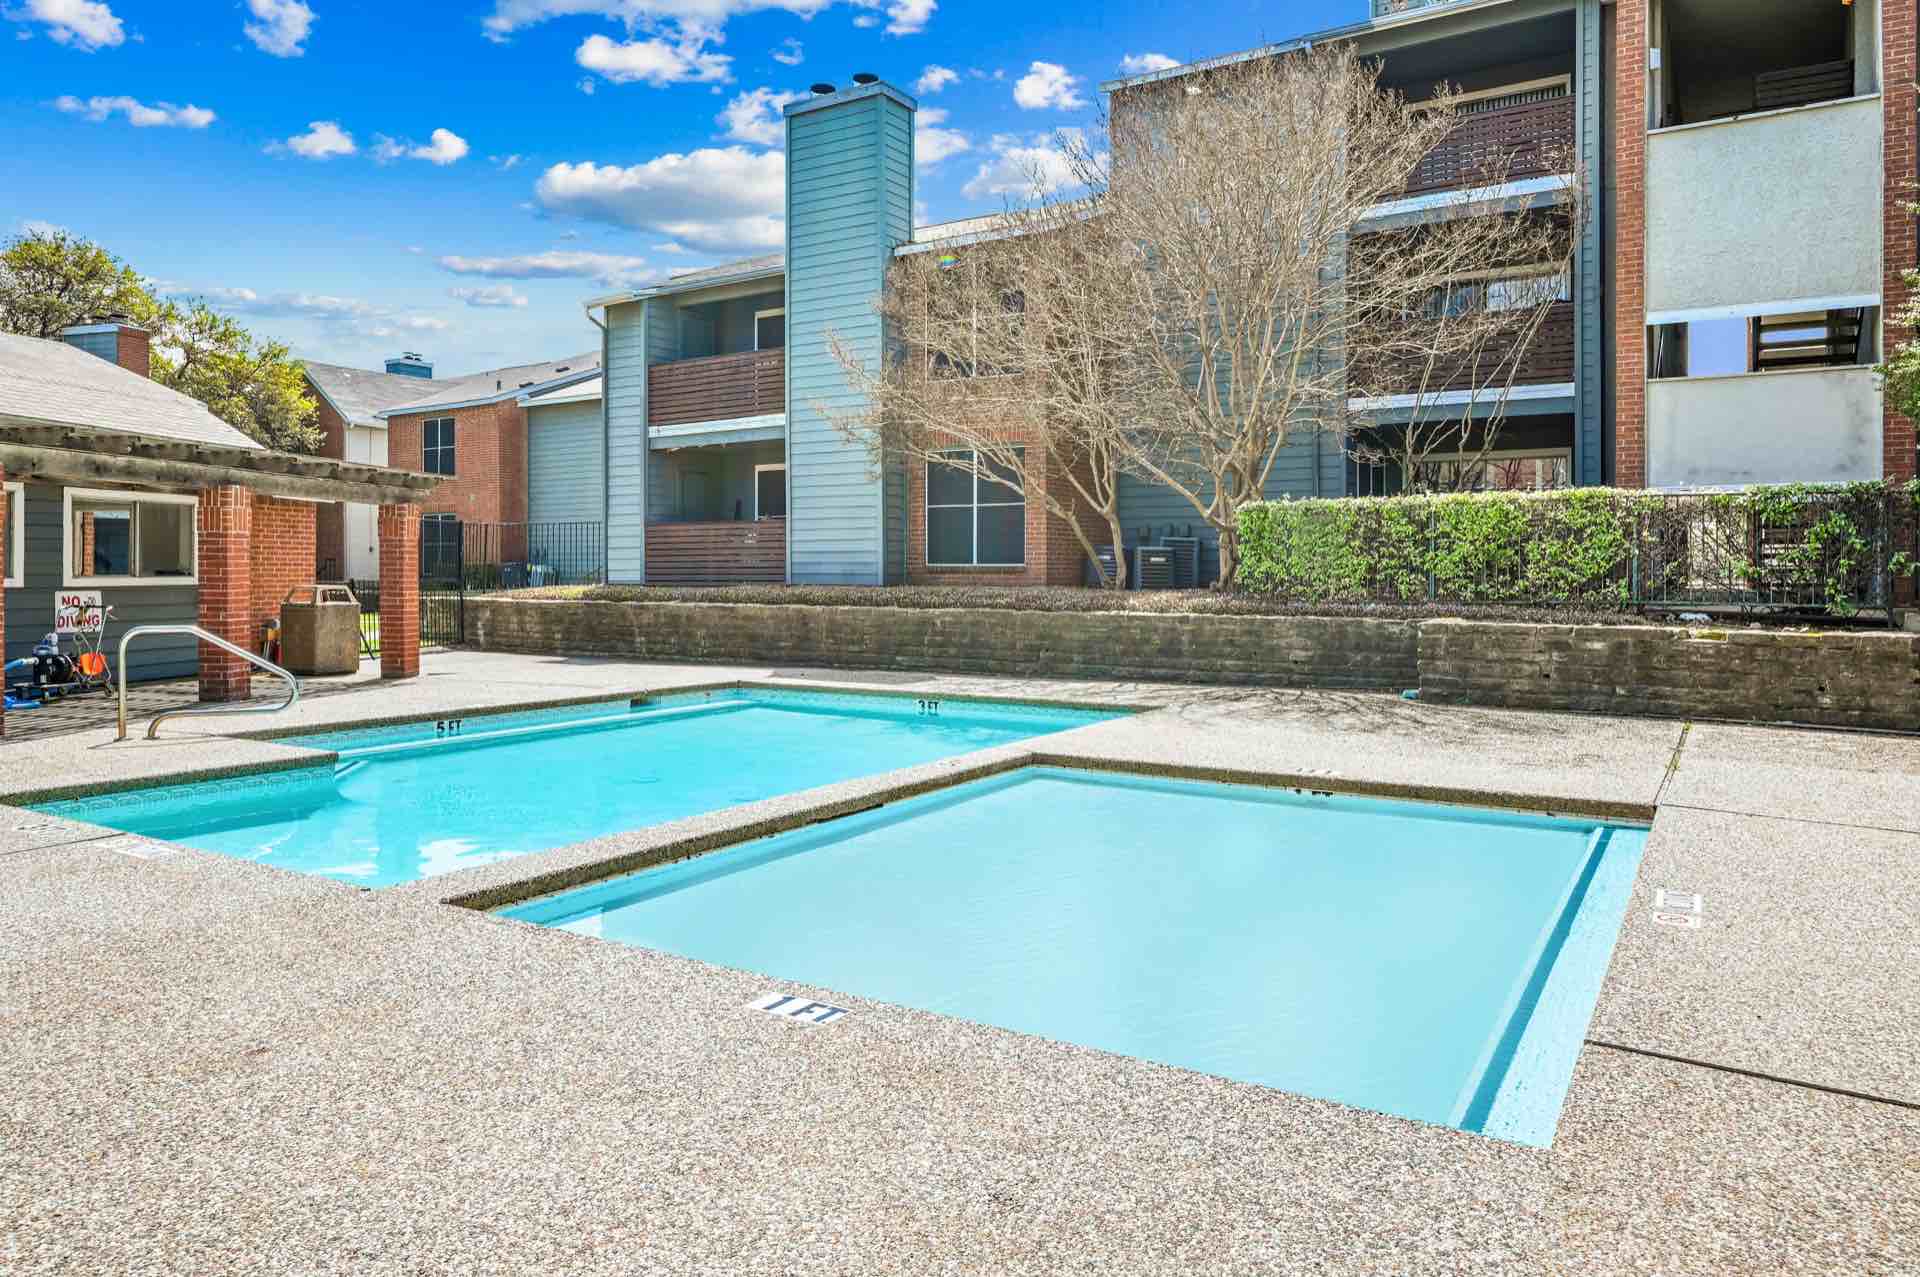 Double pool by leasing center